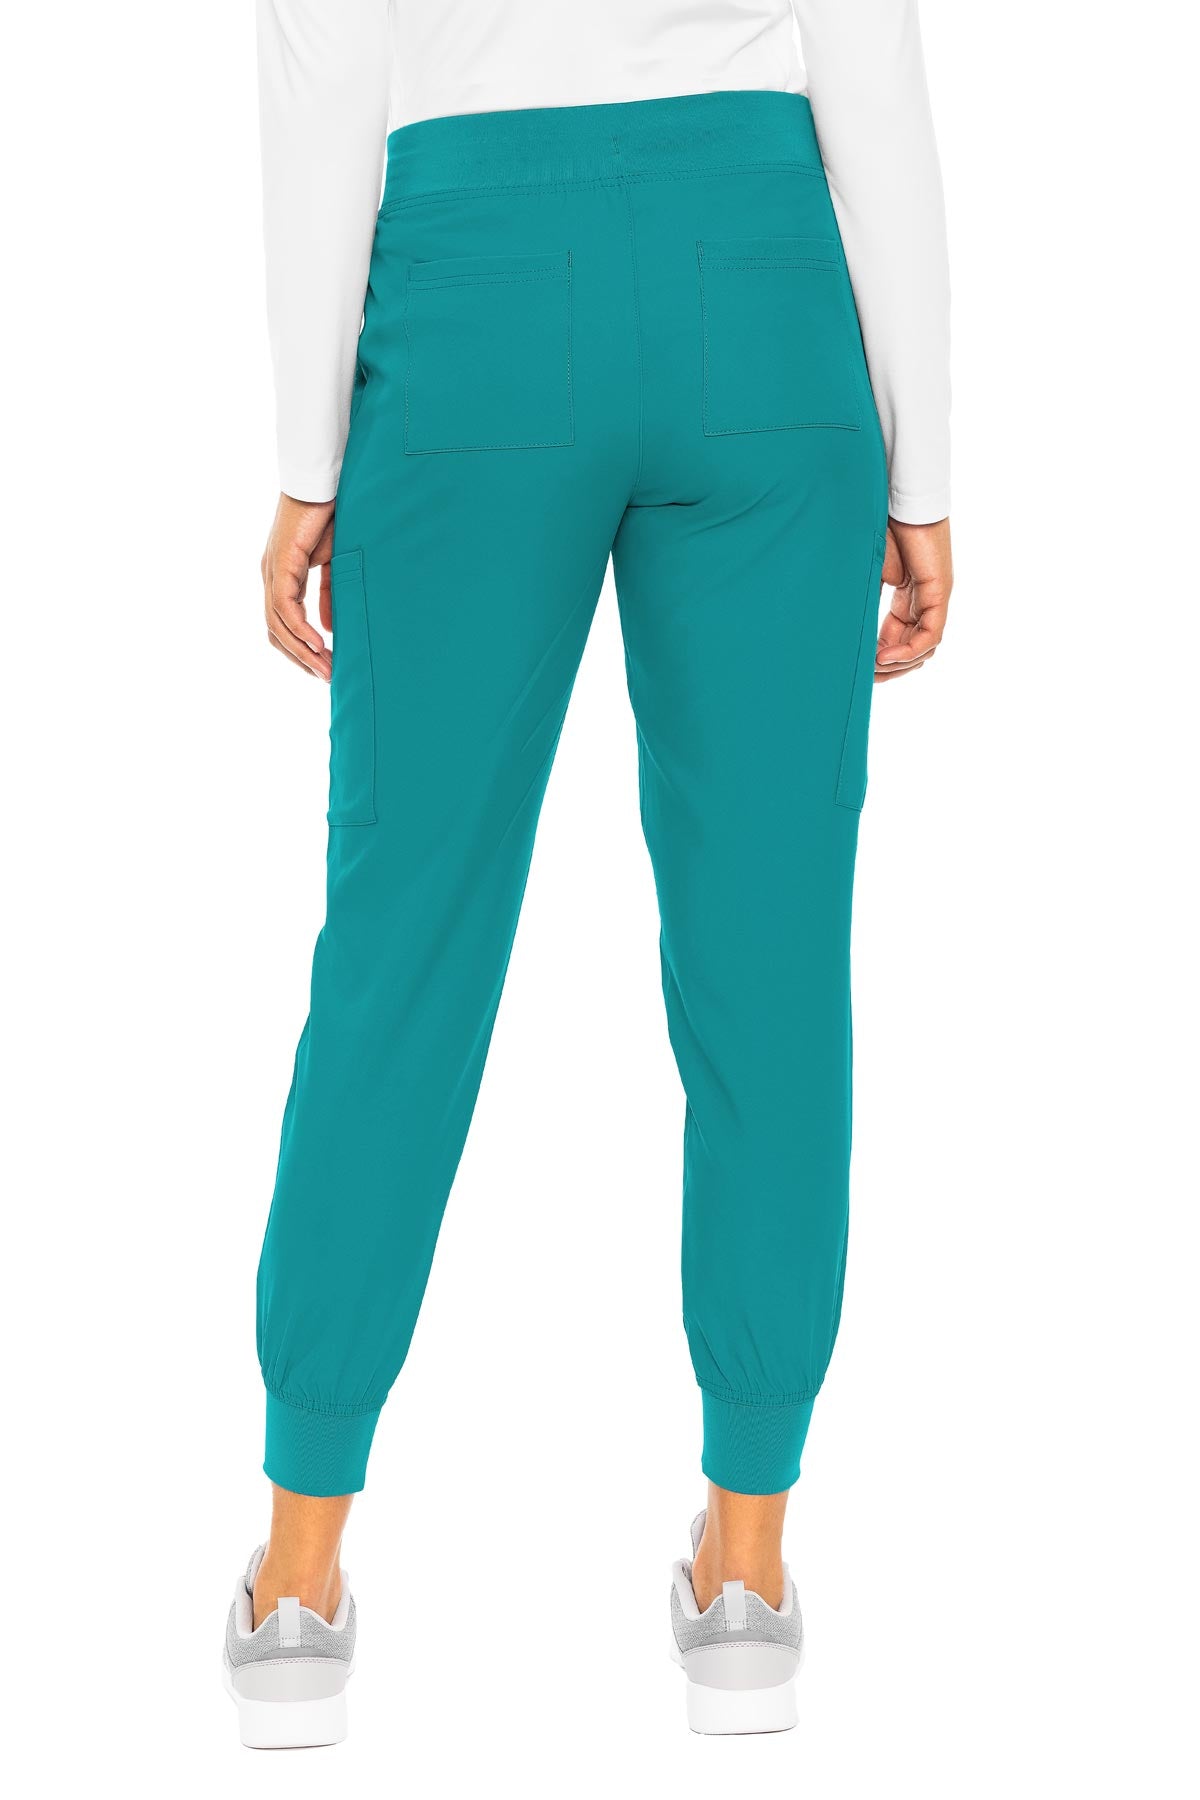 Med Couture Touch 7710 Women's Jogger Yoga Pant - PETITE – Valley